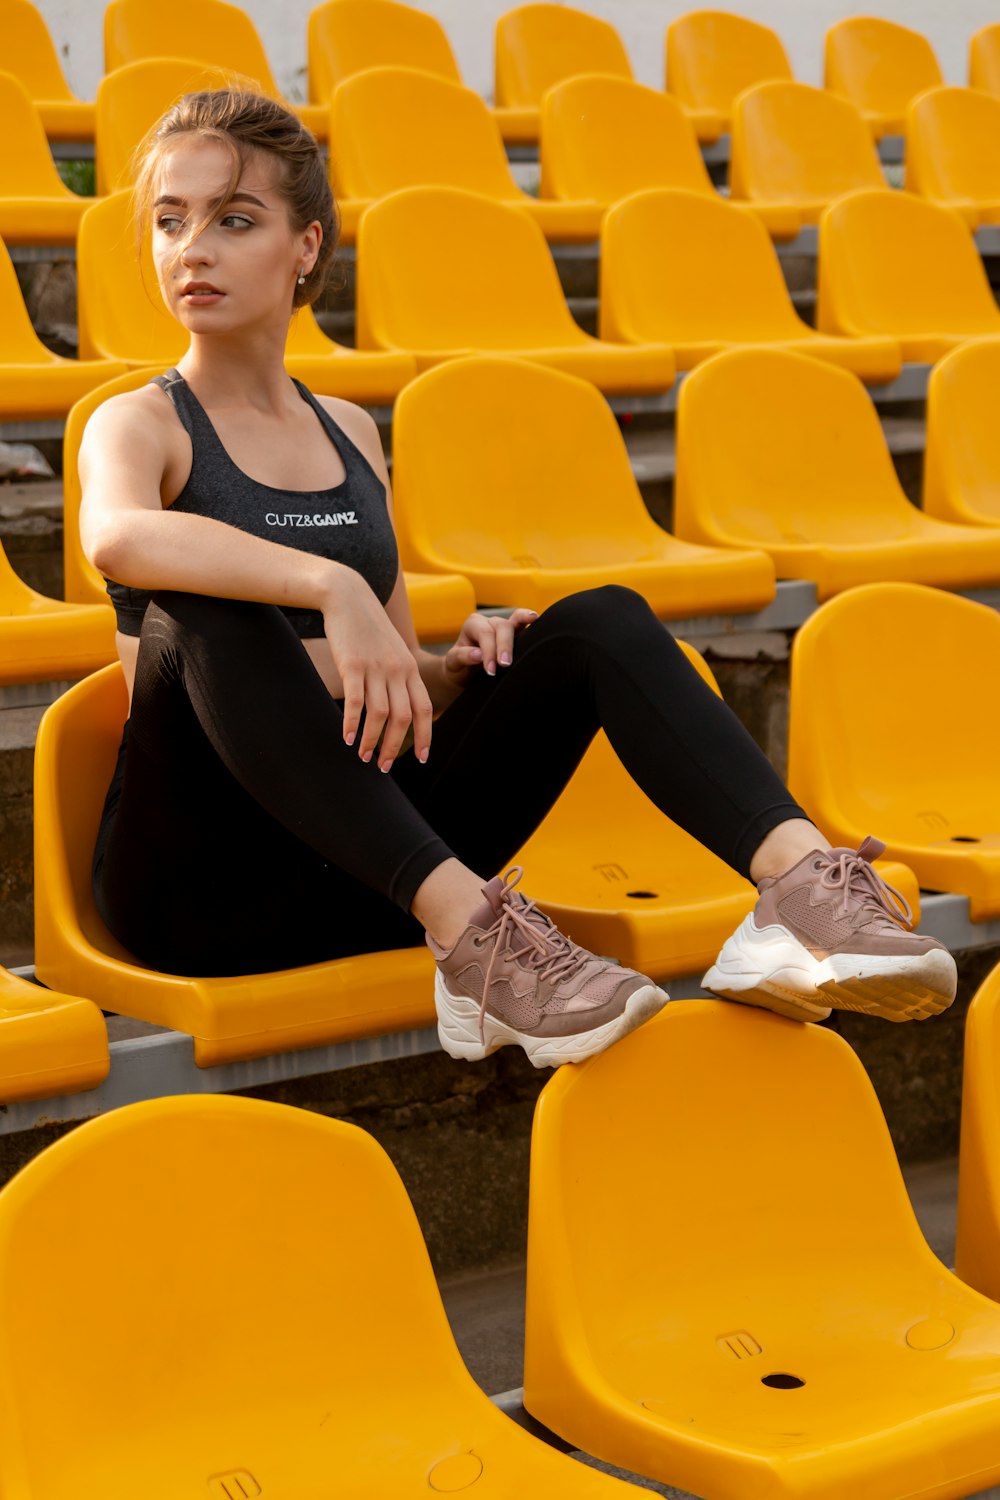 Sportive woman wearing black leggings and top sitting on chair Stock Photo